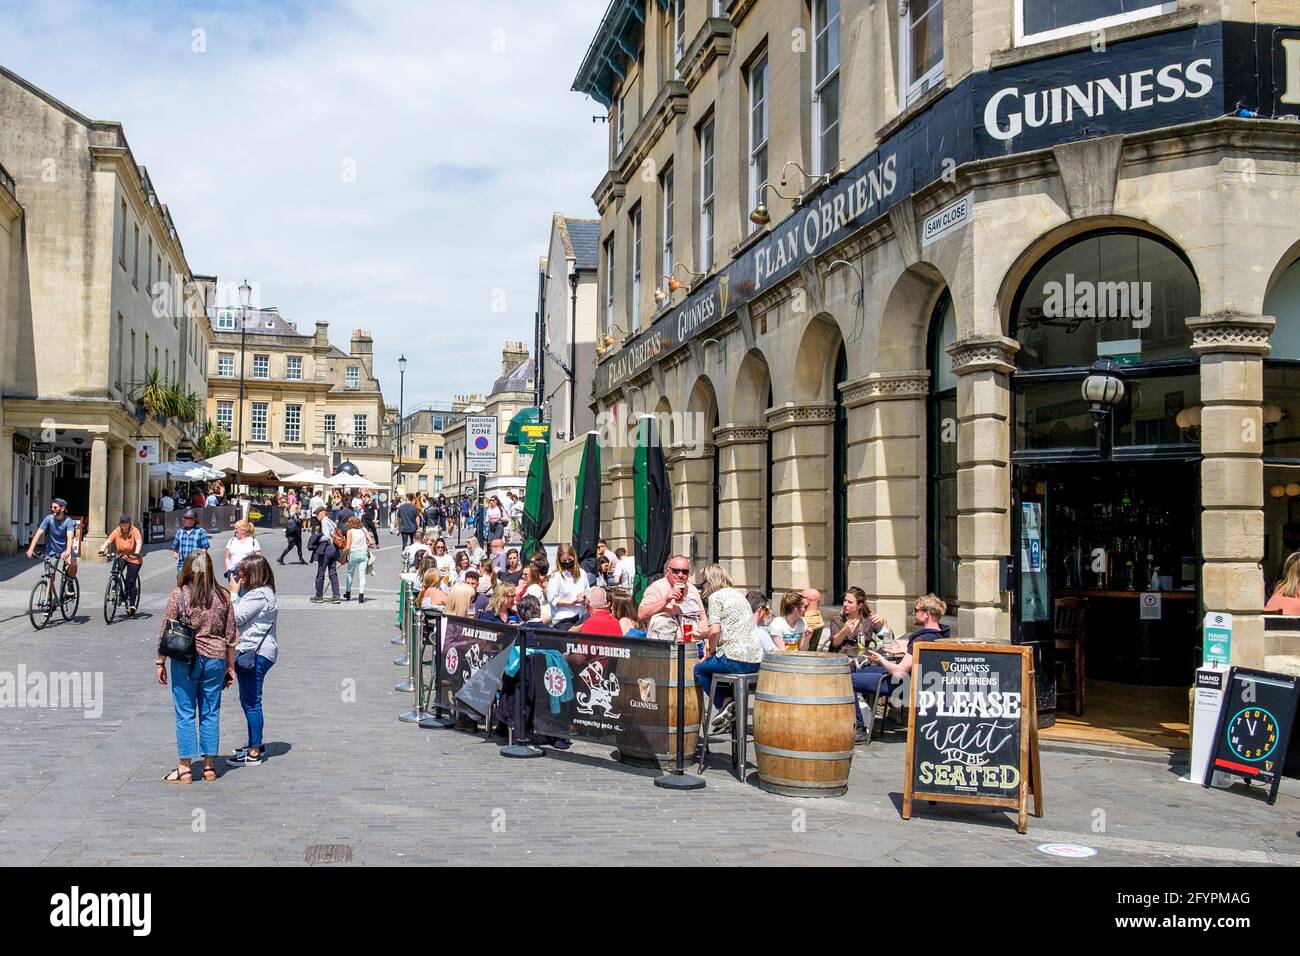 Bath, Somerset, UK. 29th May, 2021. Customers are pictured enjoying an afternnon drink outside Flann O' Brien's Irish Pub in the centre of Bath. Crowds of shoppers filled the streets as people made the most of the bank holiday weekend sunshine. Credit: Lynchpics/Alamy Live News Stock Photo